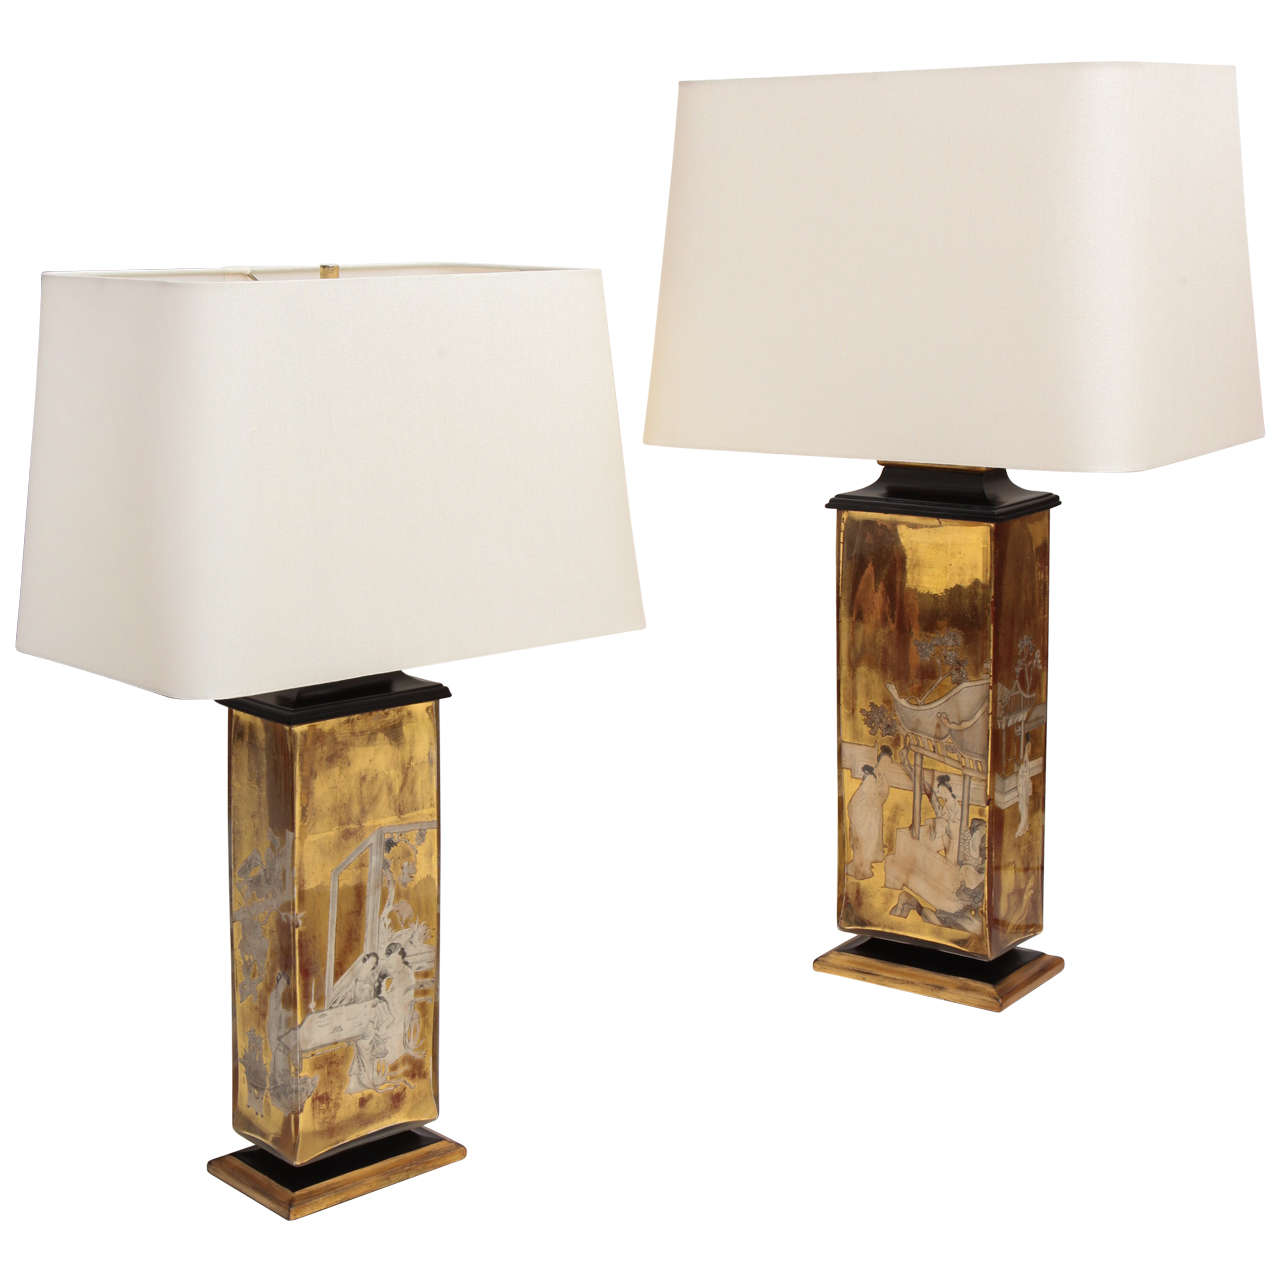 Near Pair of Gold Eglomise Table Lamps